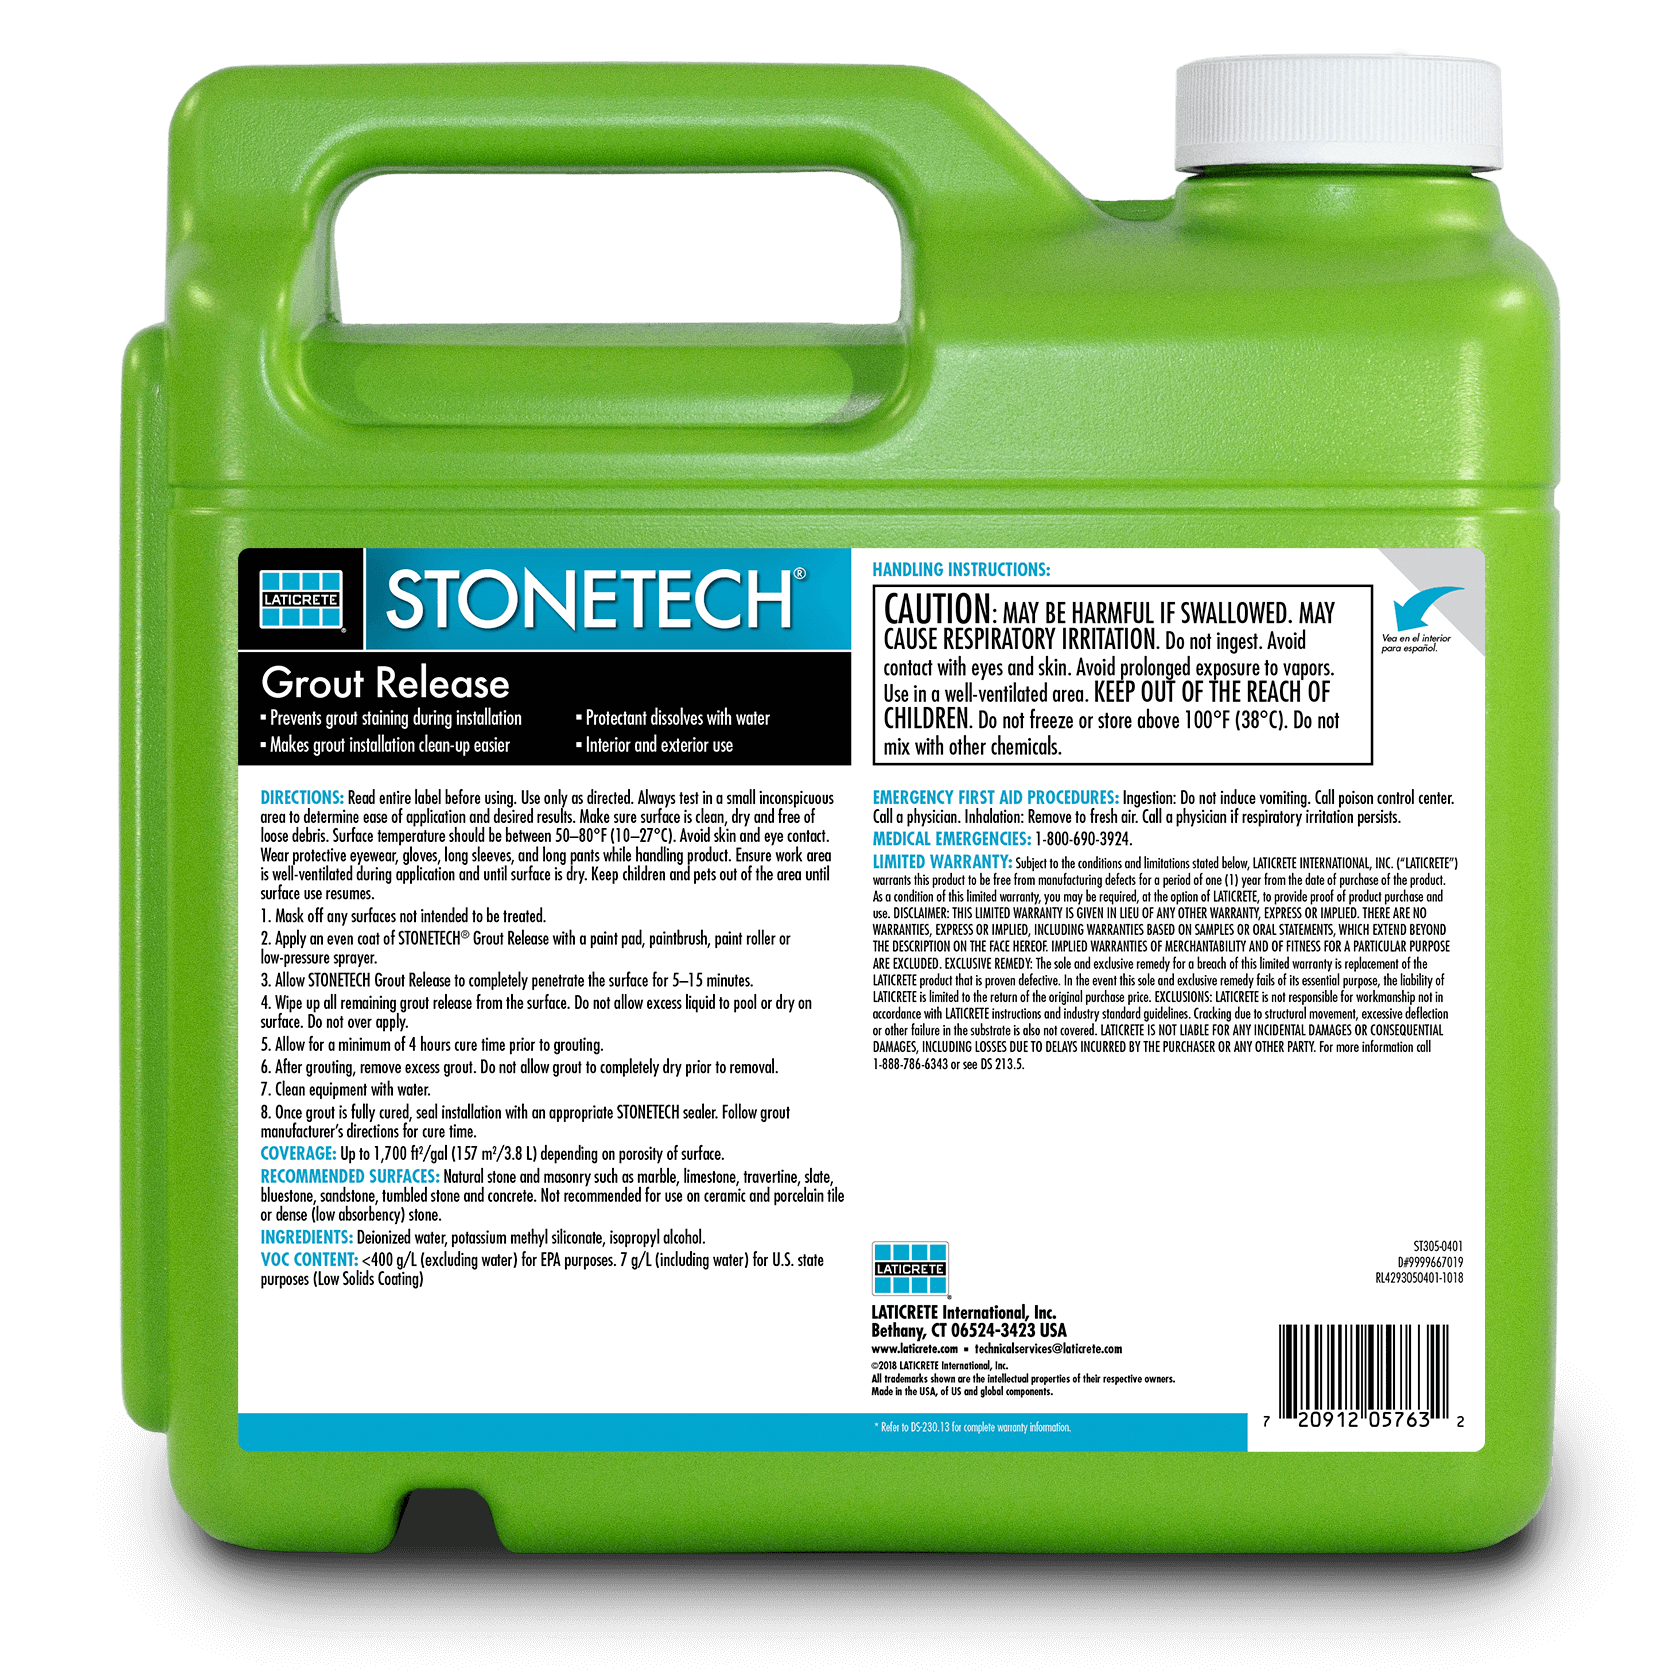 STONETECH® Grout Release